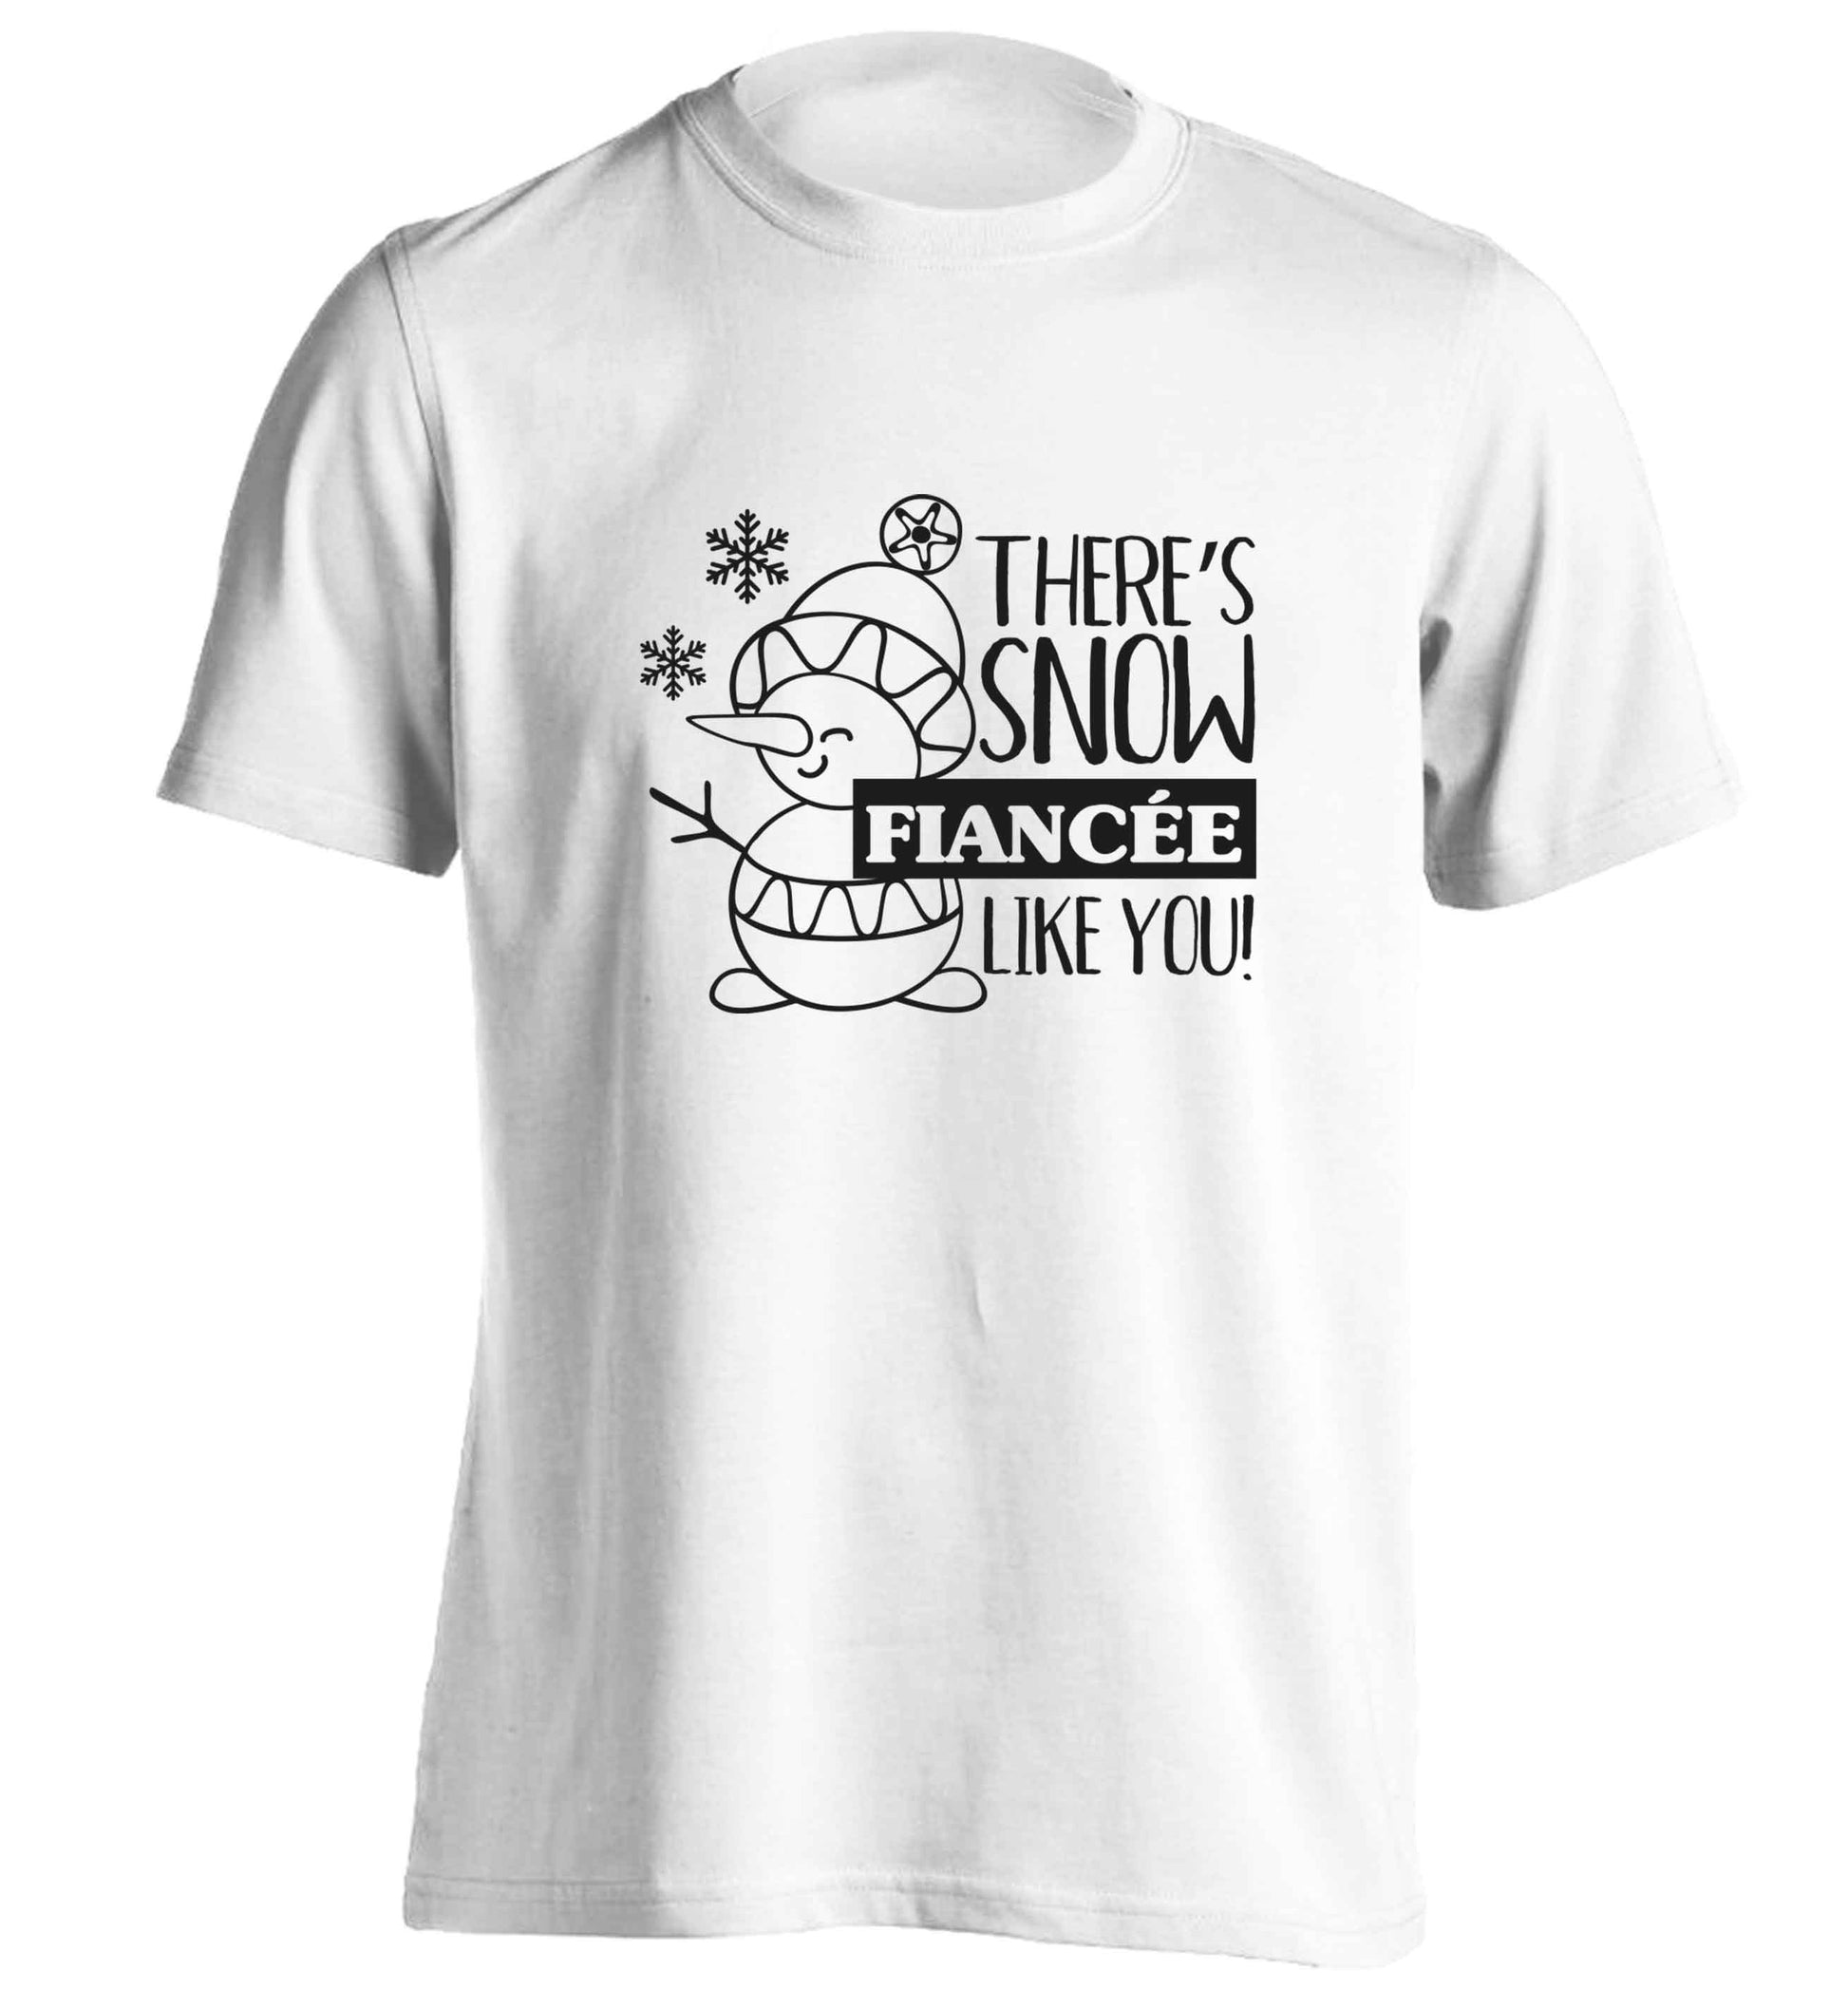 There's snow fiancee like you adults unisex white Tshirt 2XL